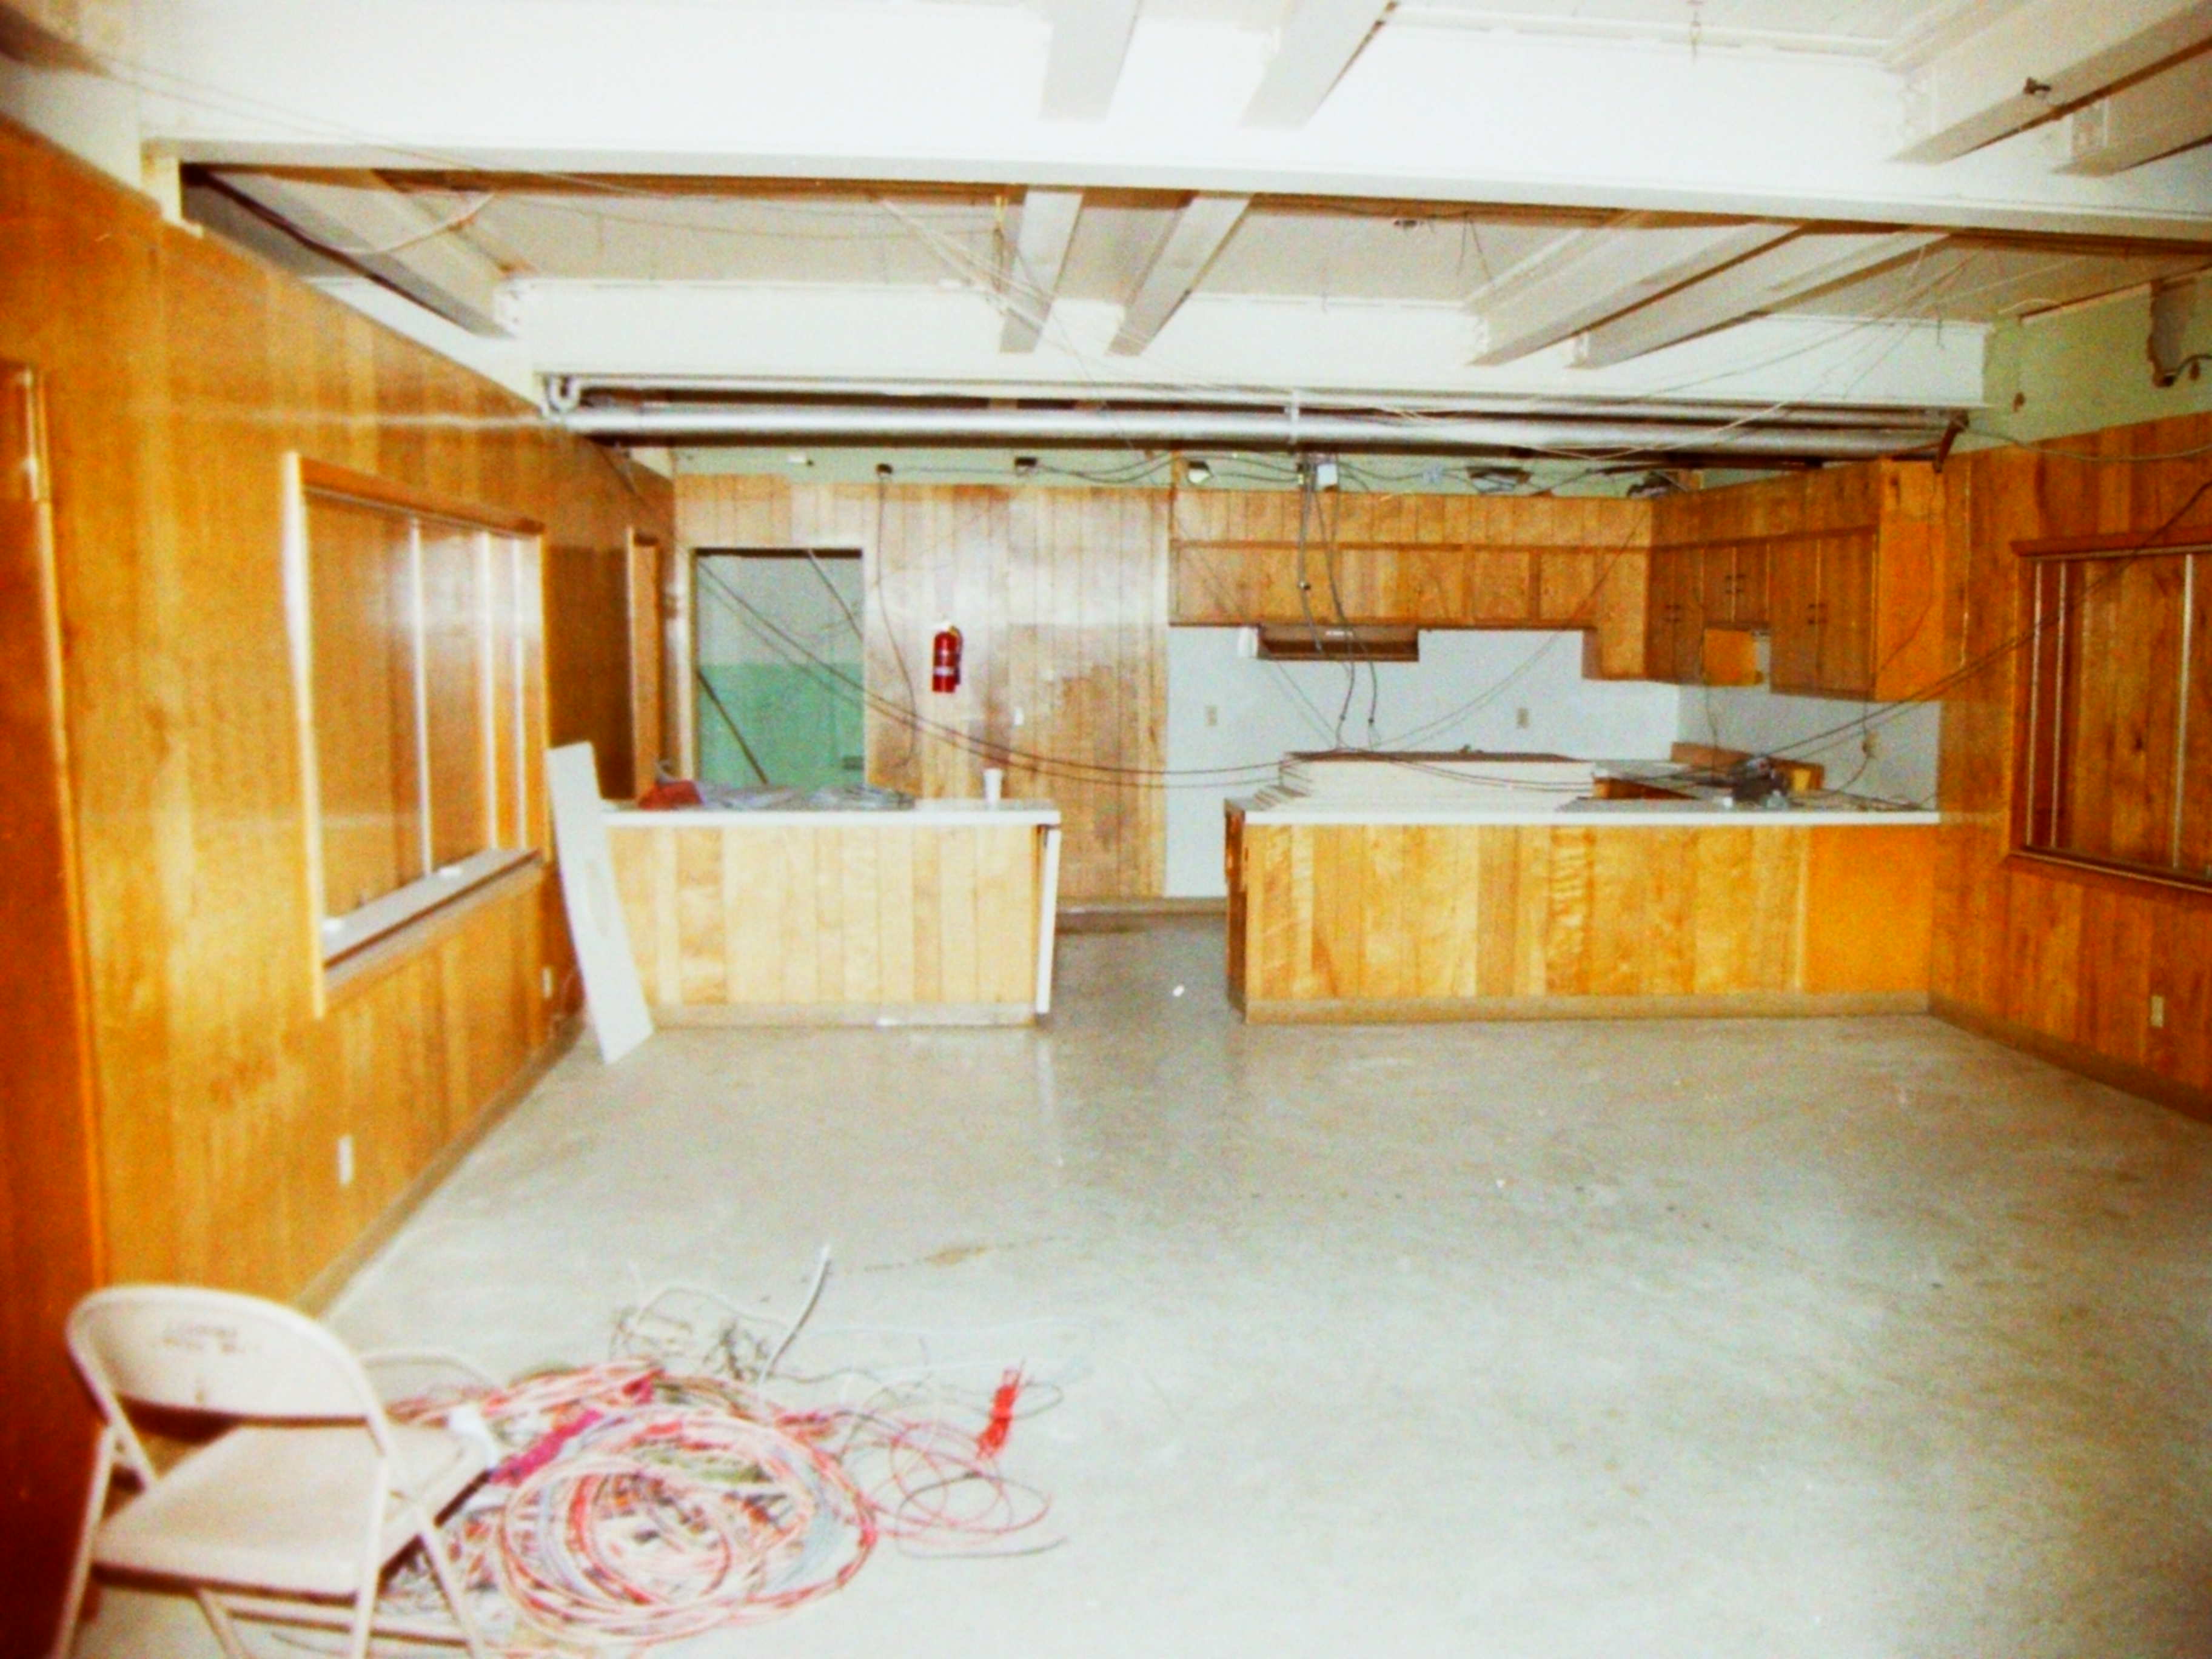 08-21-91  Other - Renovations 2